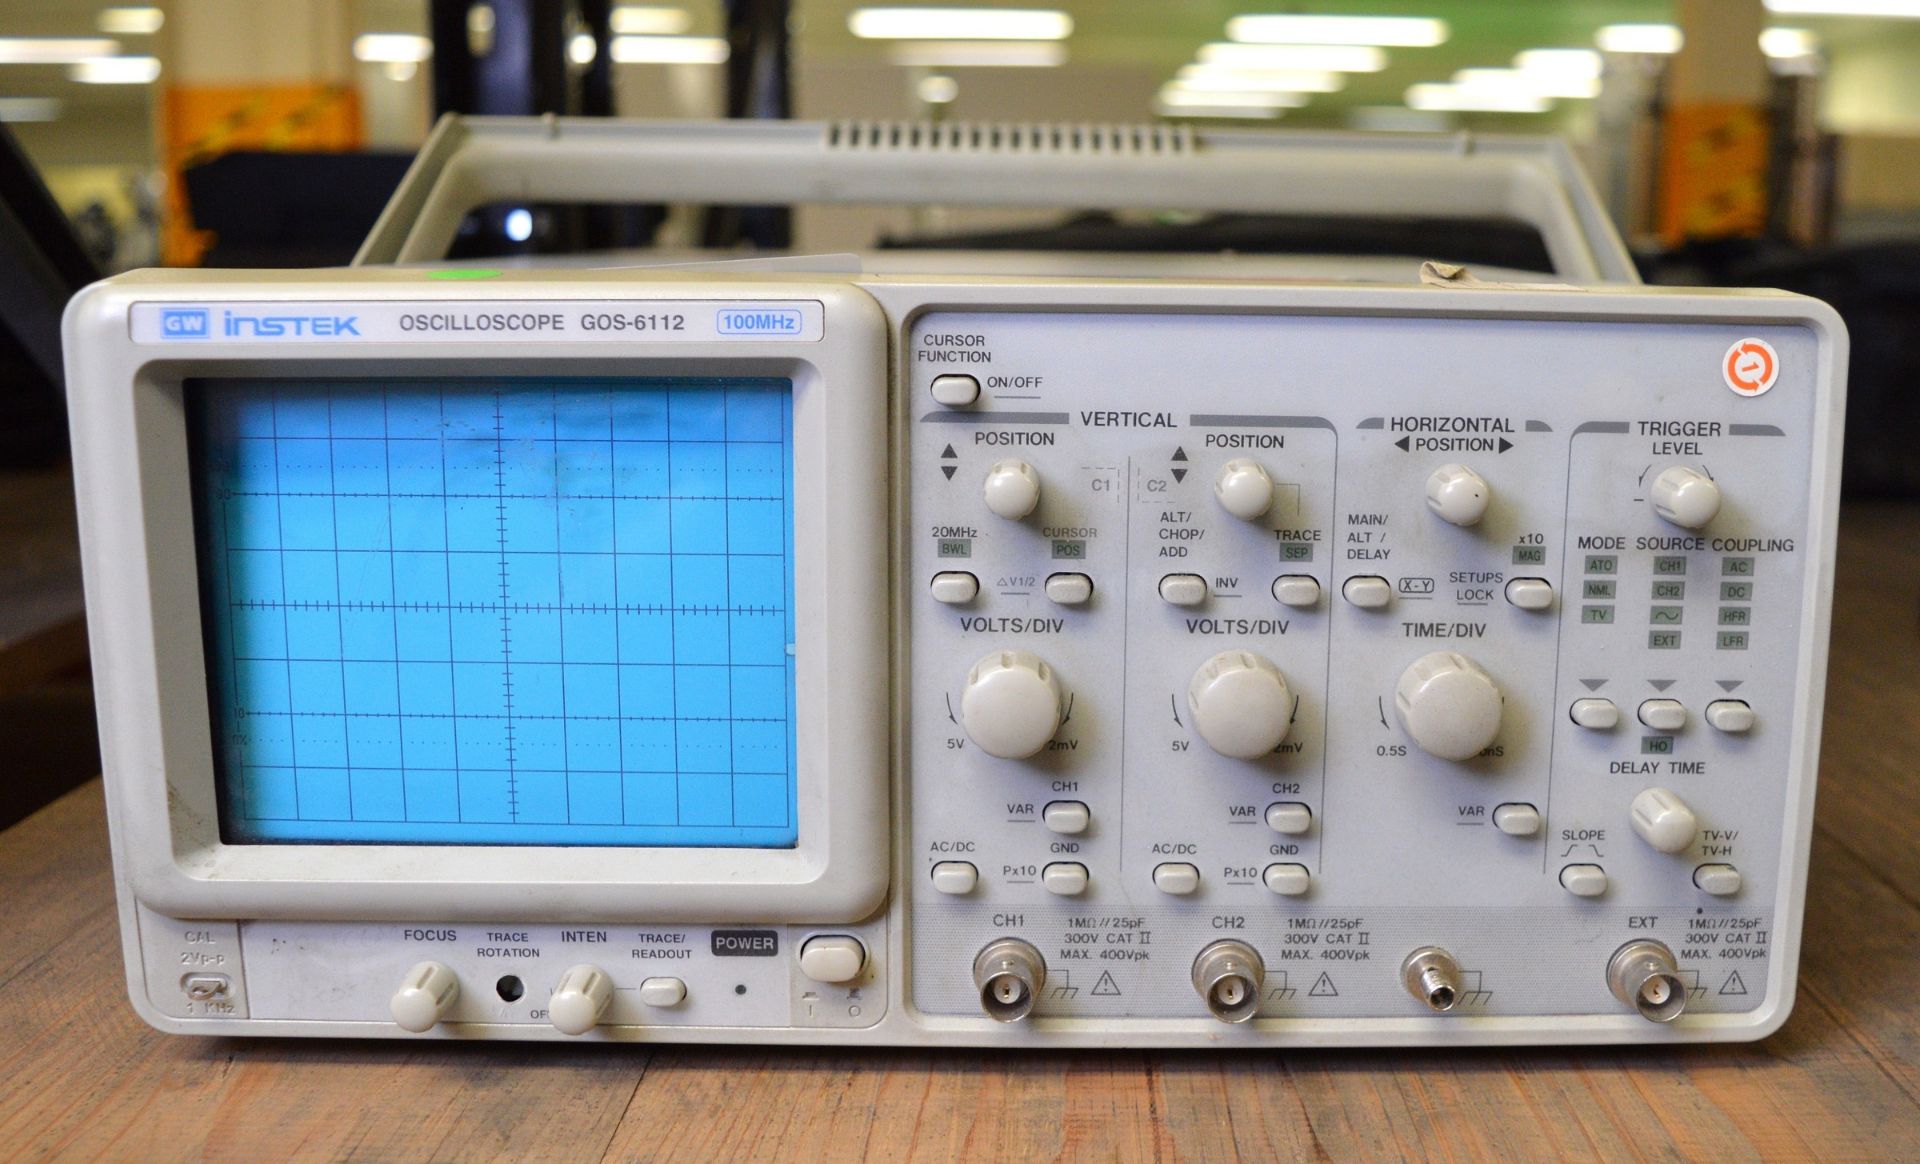 GW Instek GOS-6112 Oscilloscope - 100MHz (Damage as seen in pictures)